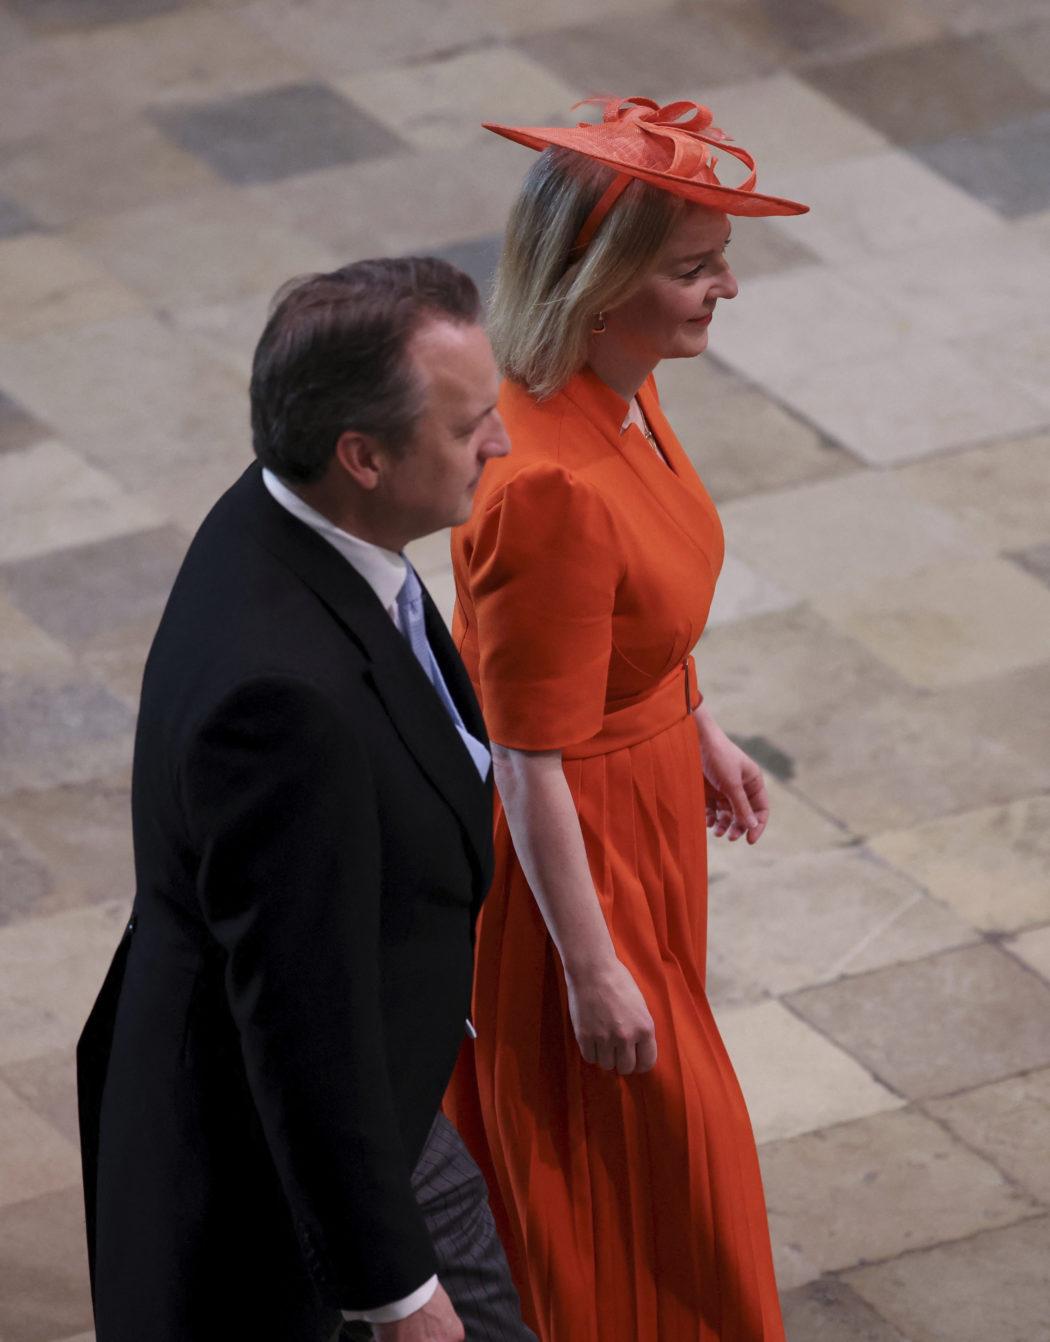 Former Prime Minister Liz Truss, right, arrives to attend Britain’s King Charles III and Queen Consort Camilla’s coronation ceremony, at Westminster Abbey, in London, Saturday, May 6, 2023. (Phil Noble/Pool Photo via AP)